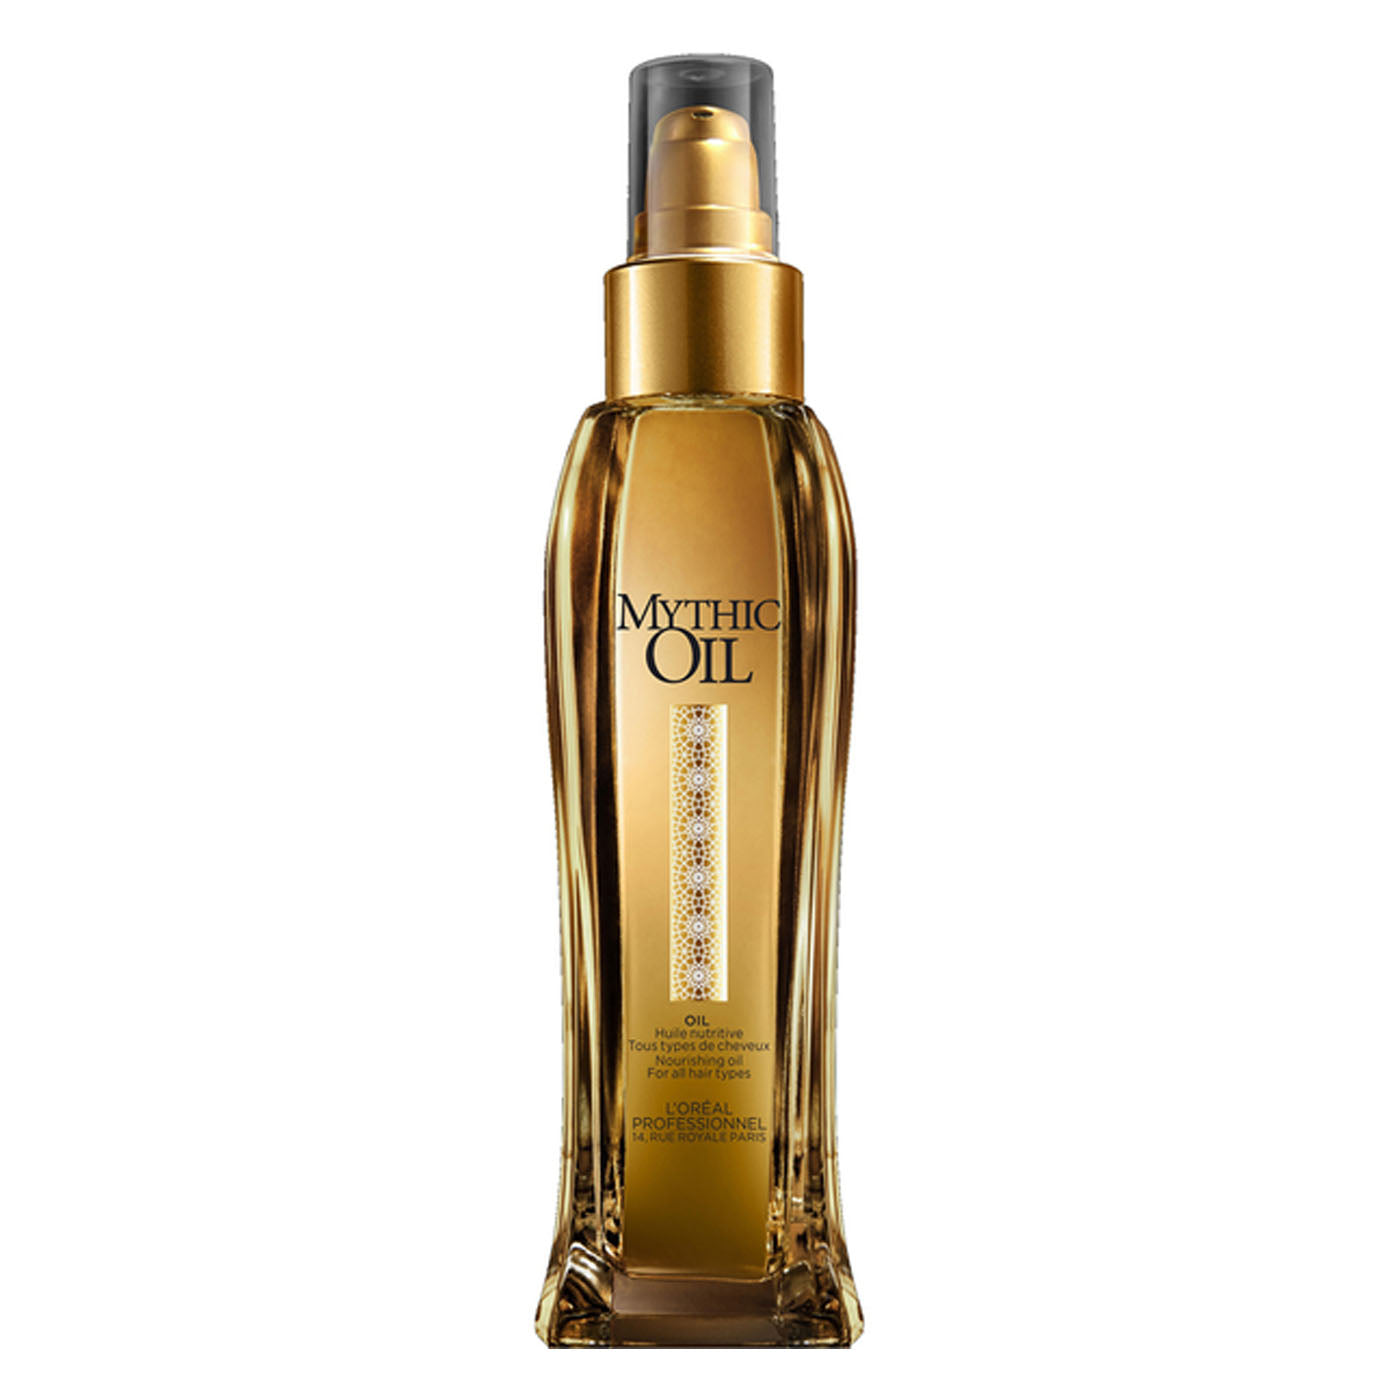 L'Oreal Mythic Oil Original Oil (100ml) - Ultimate Hair and Beauty